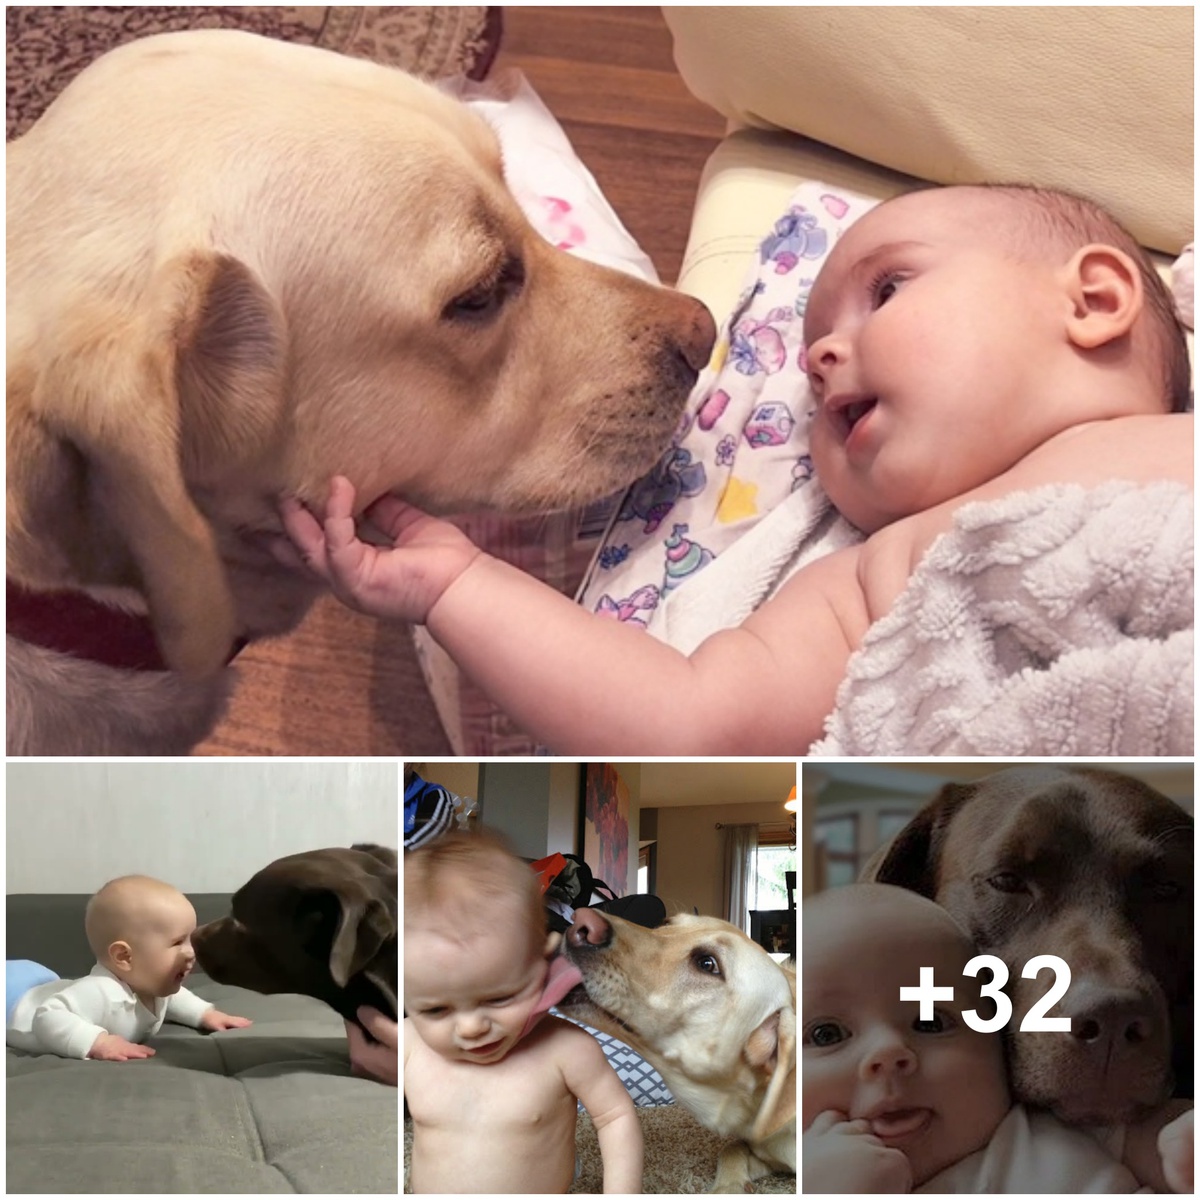 Millions of people have been moved by the sweet gestures that a newborn baby made to the dog on their first meeting. (Video)